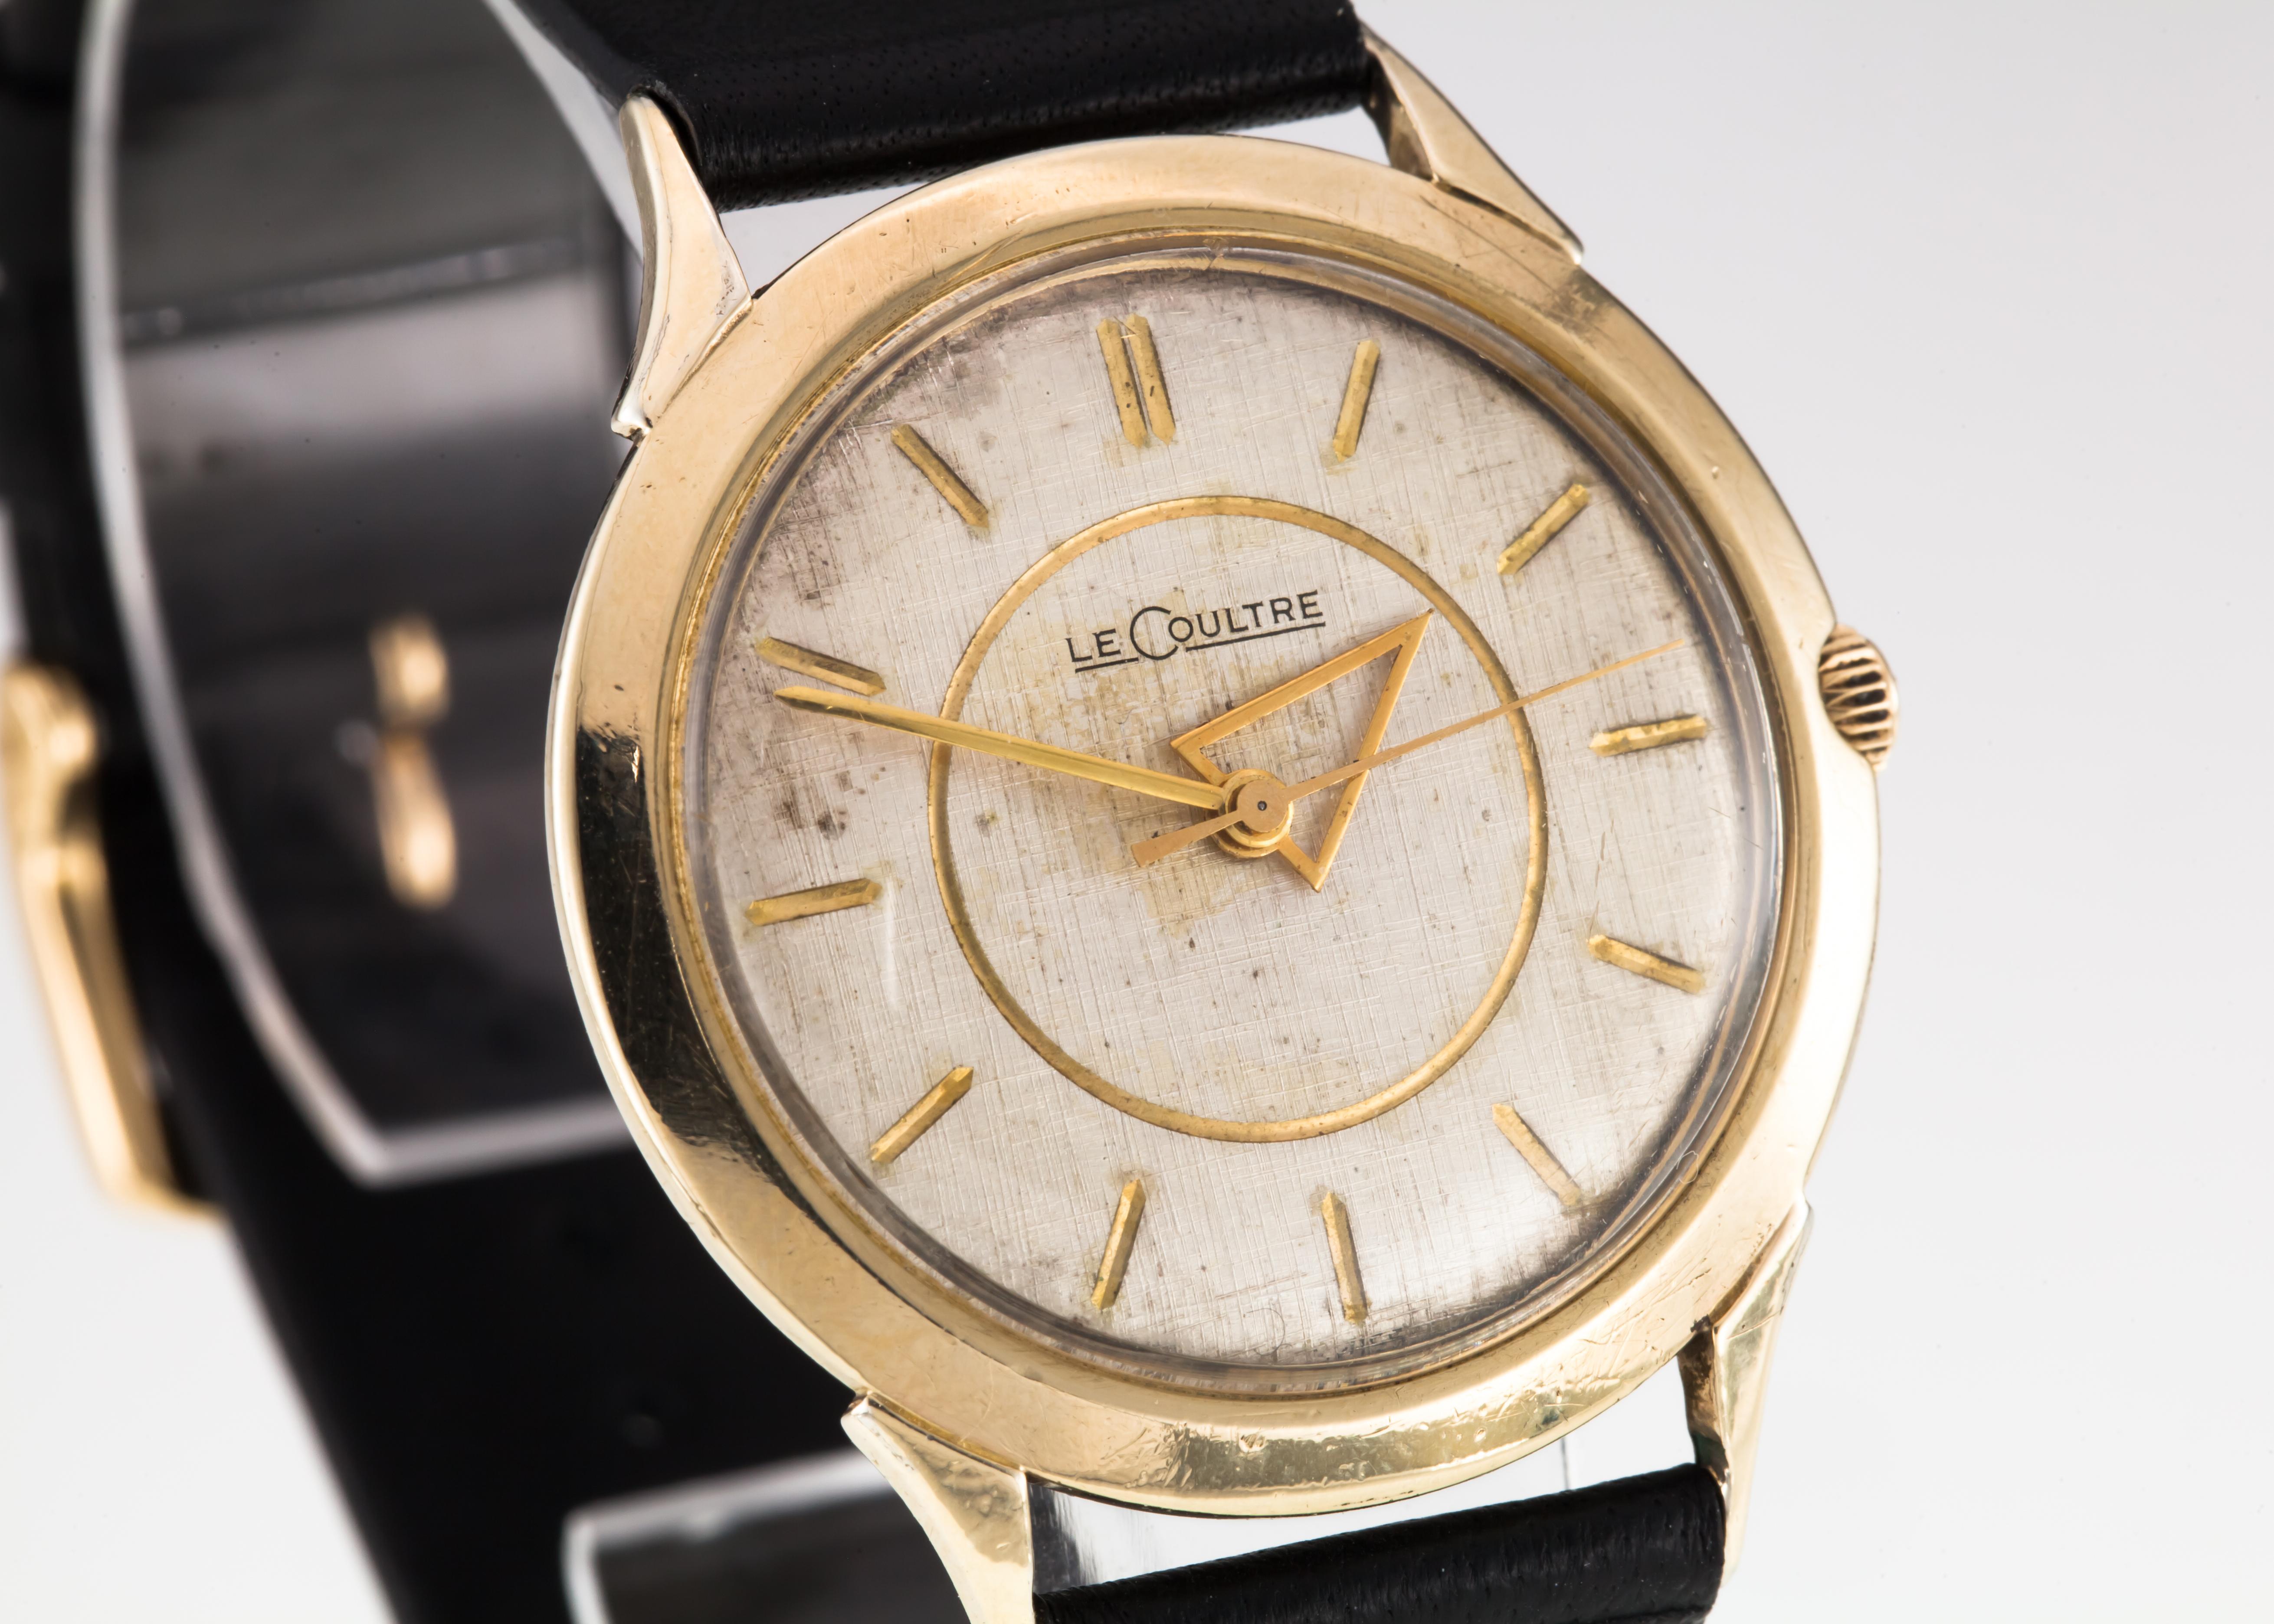 Modern Le Coultre Men's Gold-Filled Hand-Winding Watch w/ Leather Strap Unique Hands! For Sale